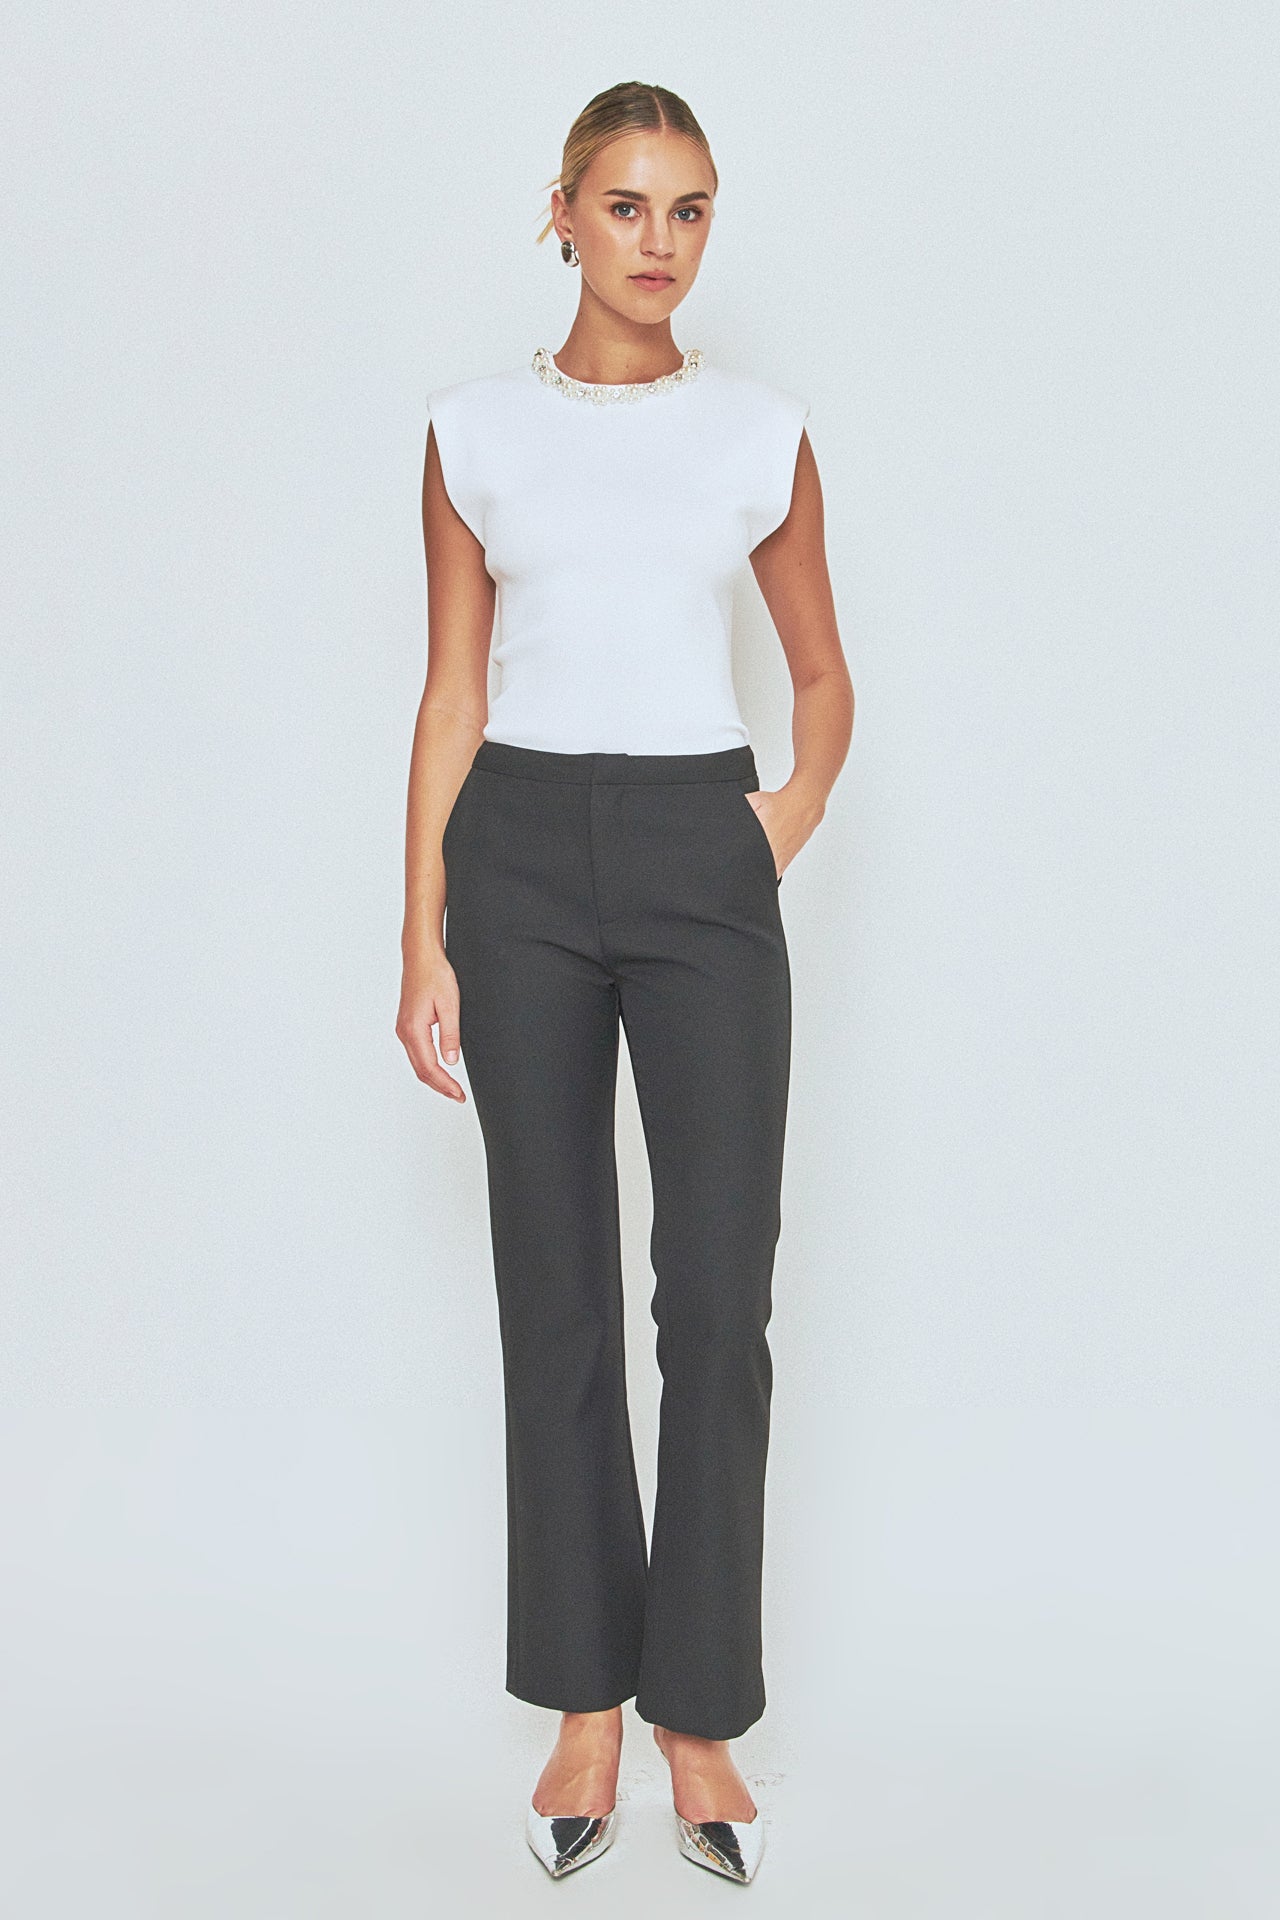 Endless Rose - Slim Fit Trousers - Pants in Women's Clothing available at endlessrose.com